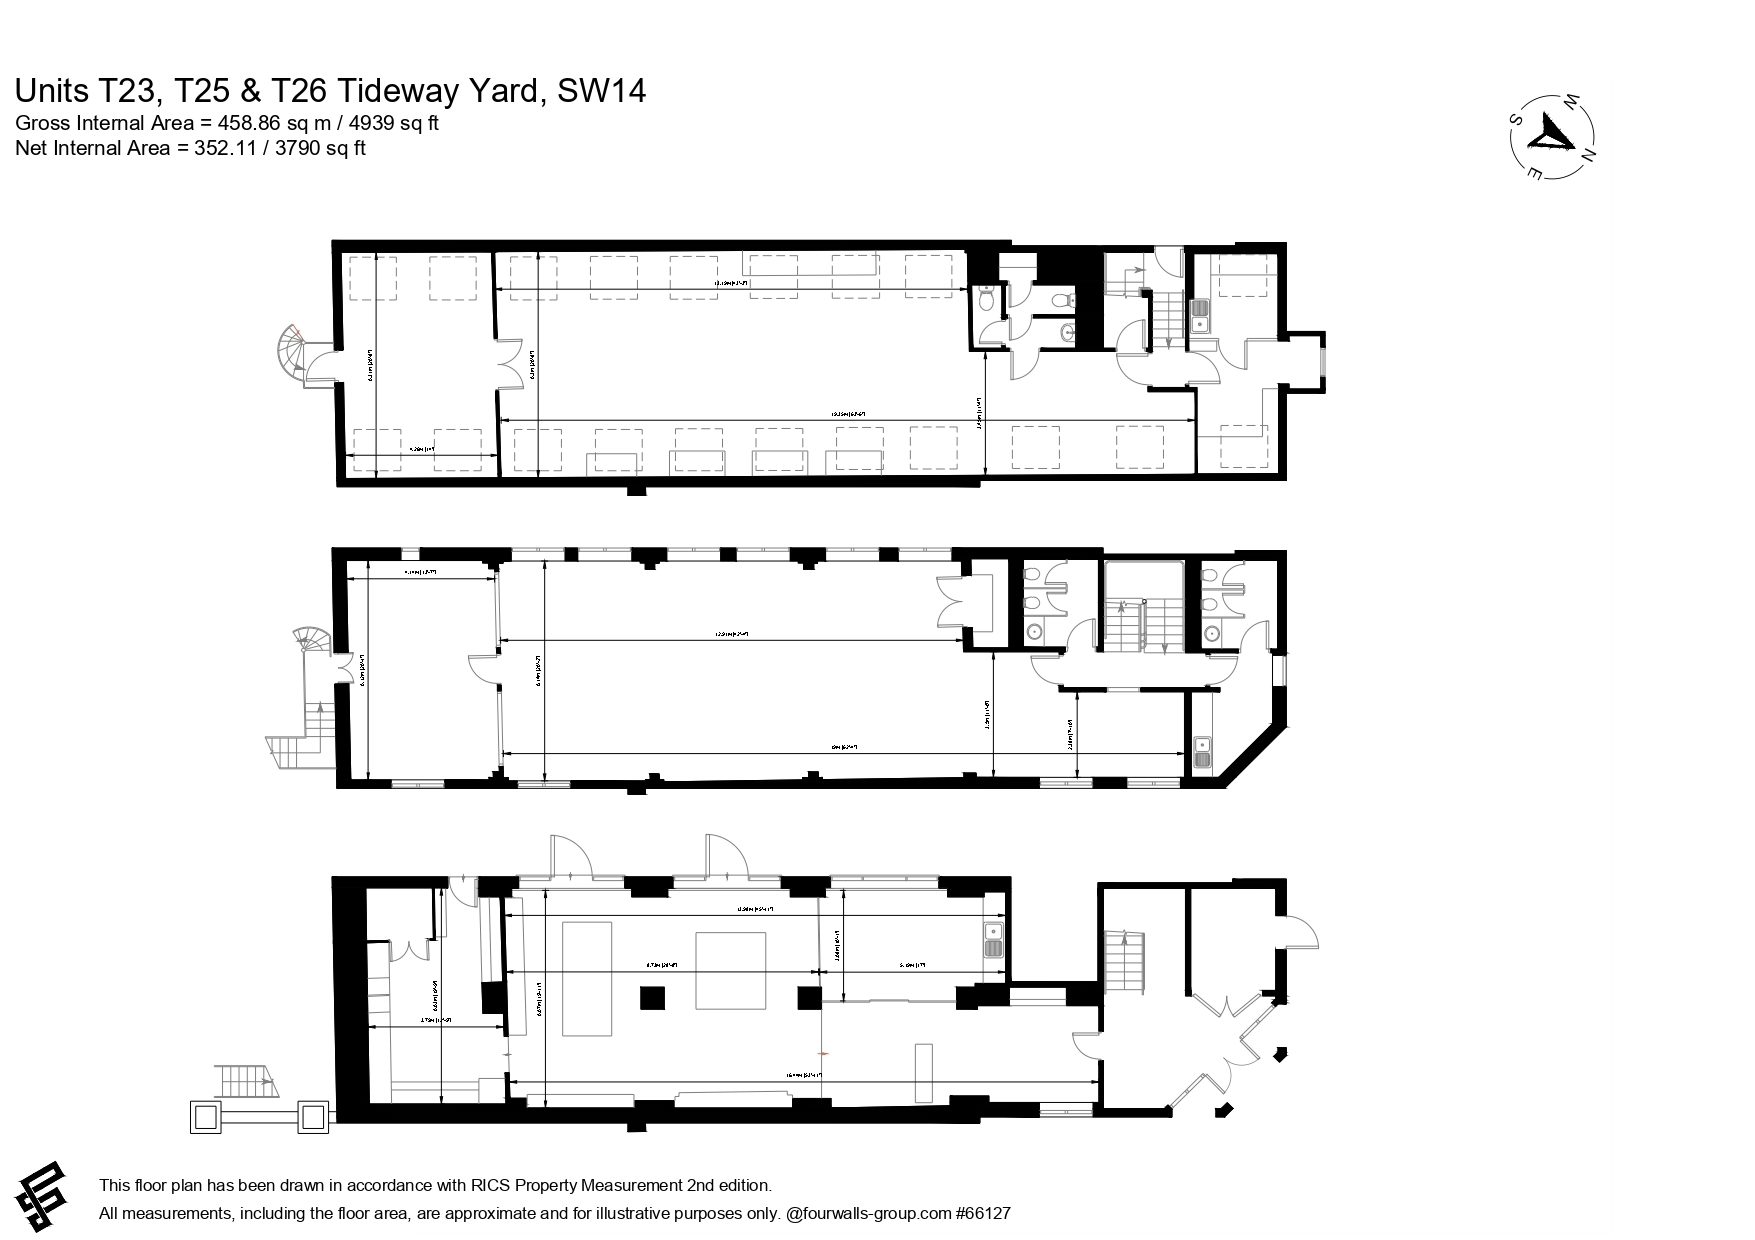 NIA floor plan T23 25 26 page 0001